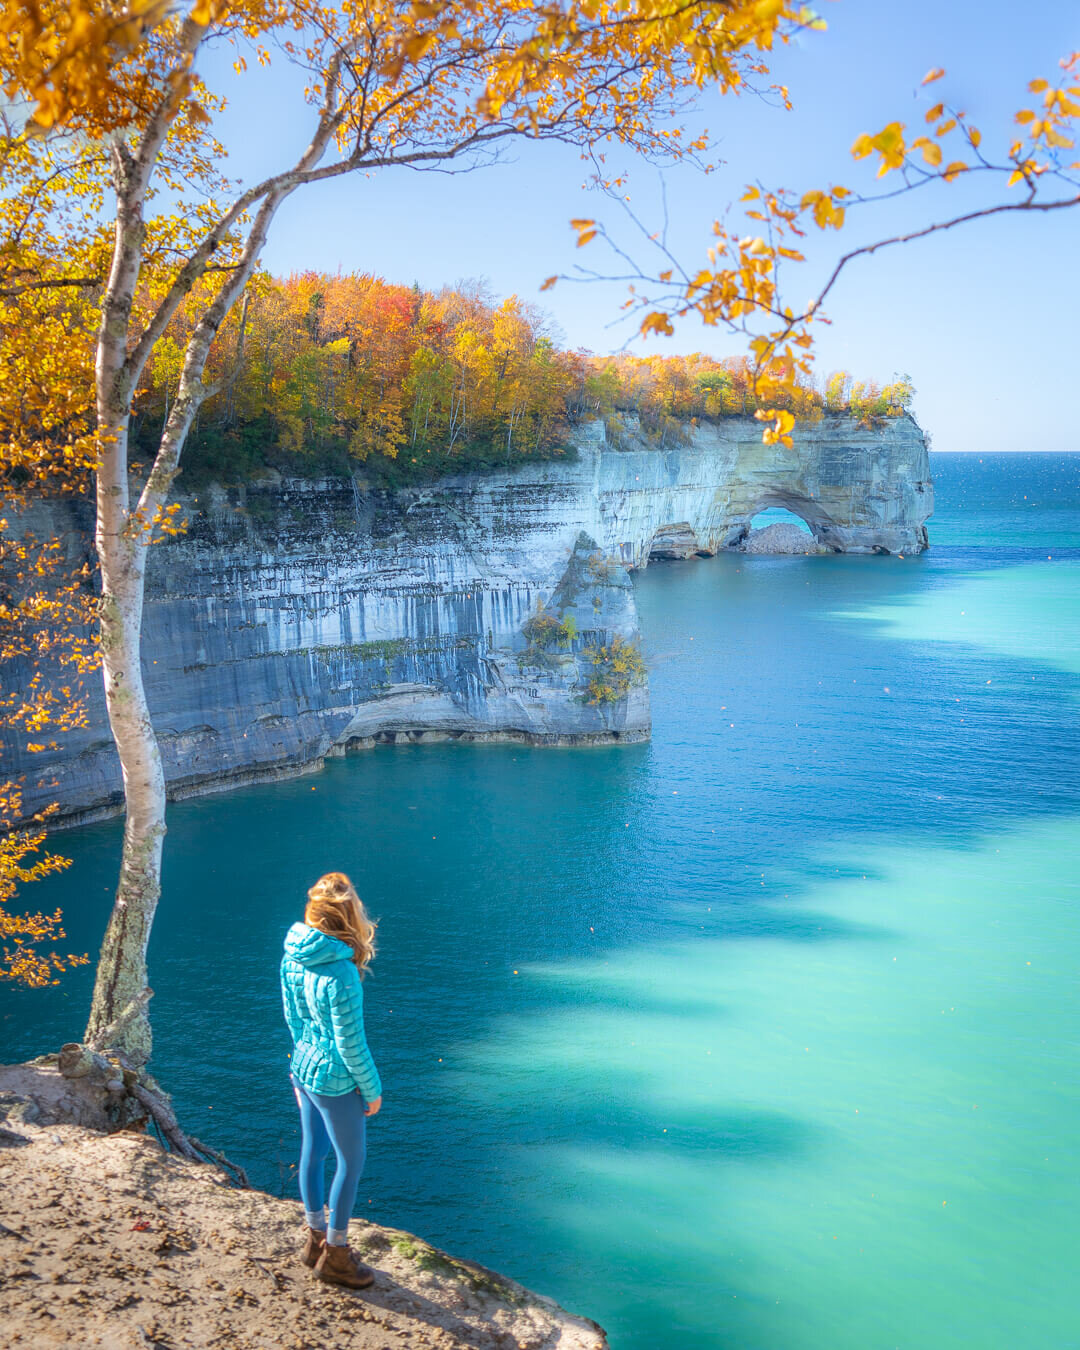 Autumn colors along Pictured Rocks National Lakeshore in Michigan.